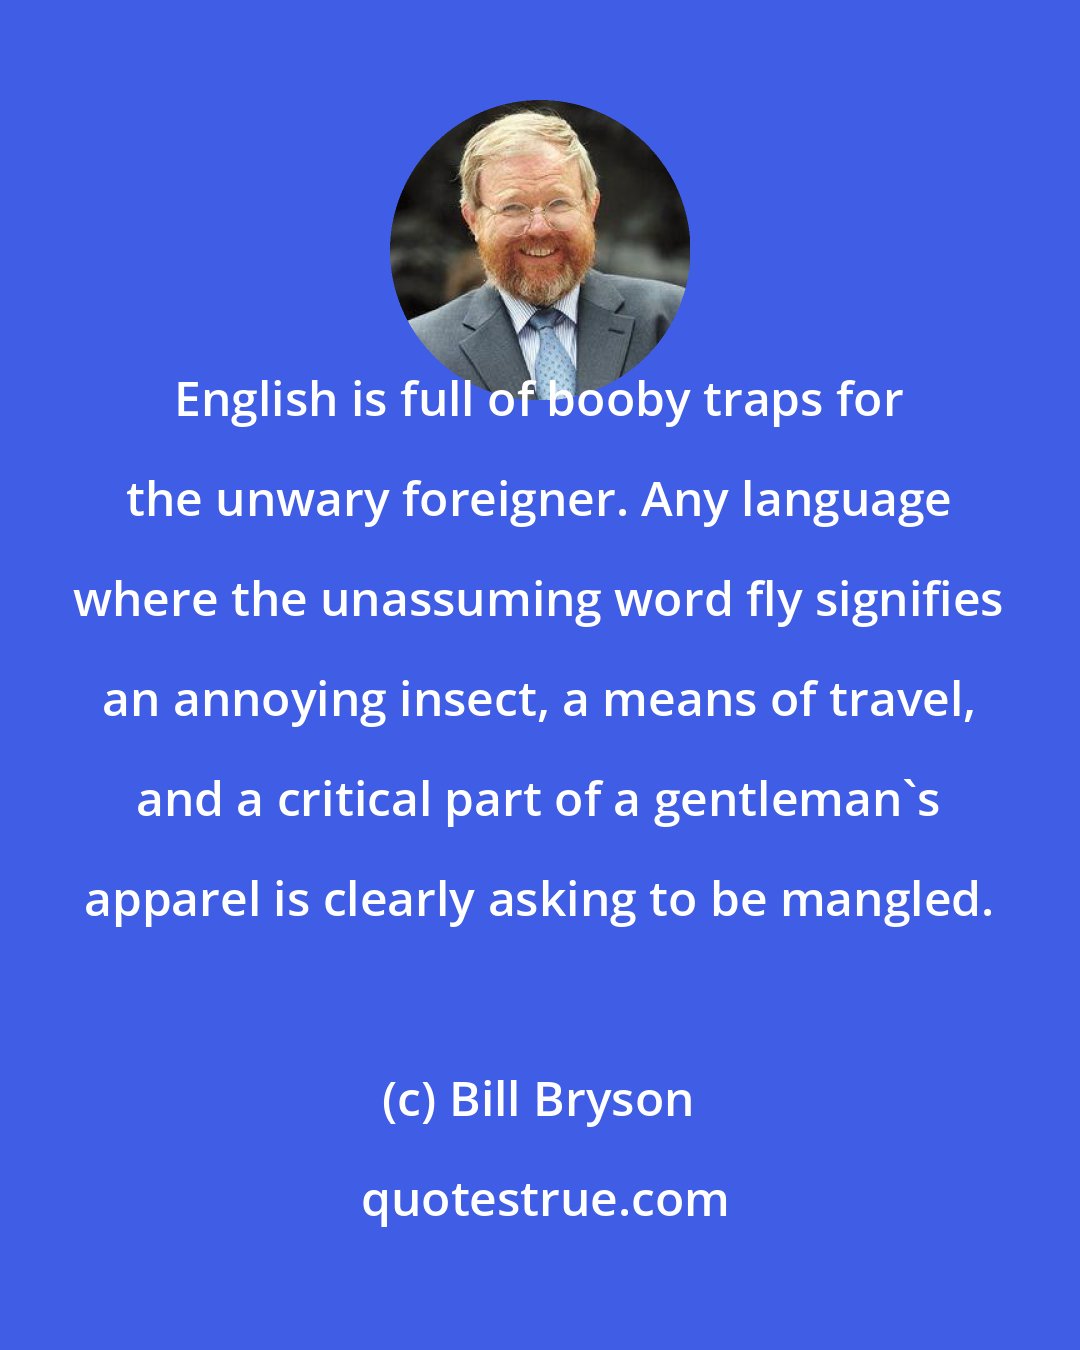 Bill Bryson: English is full of booby traps for the unwary foreigner. Any language where the unassuming word fly signifies an annoying insect, a means of travel, and a critical part of a gentleman's apparel is clearly asking to be mangled.